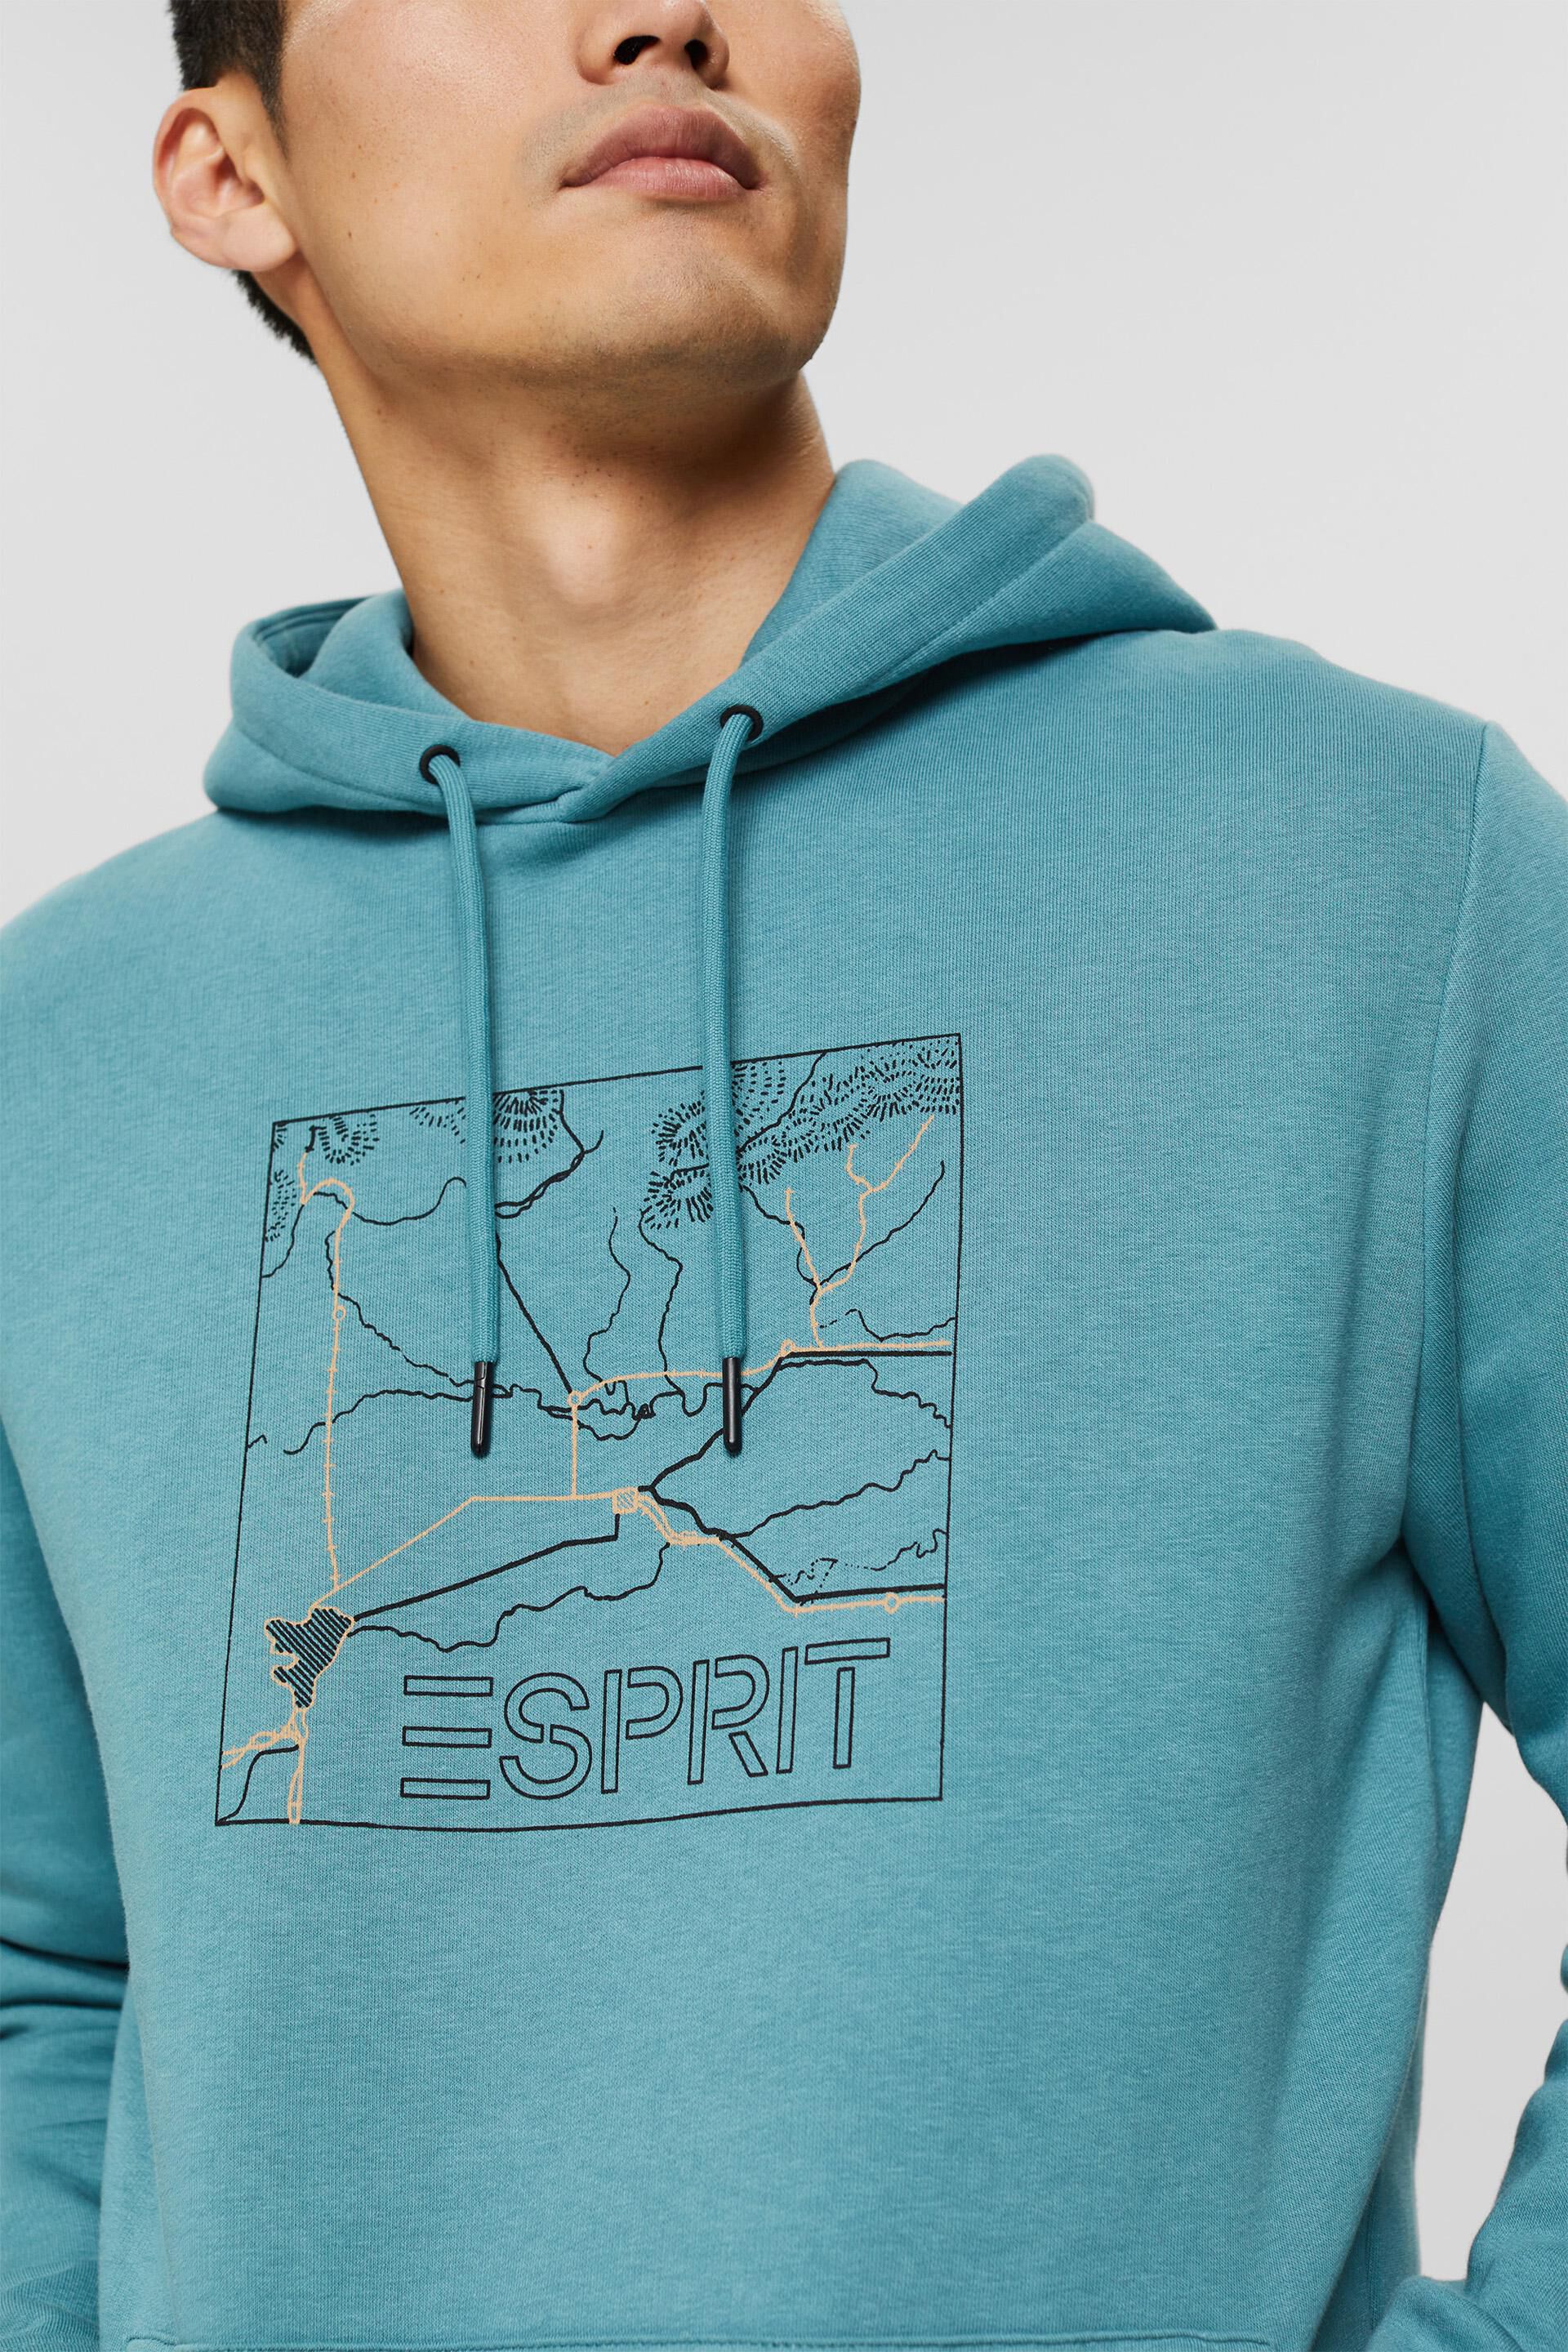 Esprit sweatshirt of hoodie material: recycled with Made print